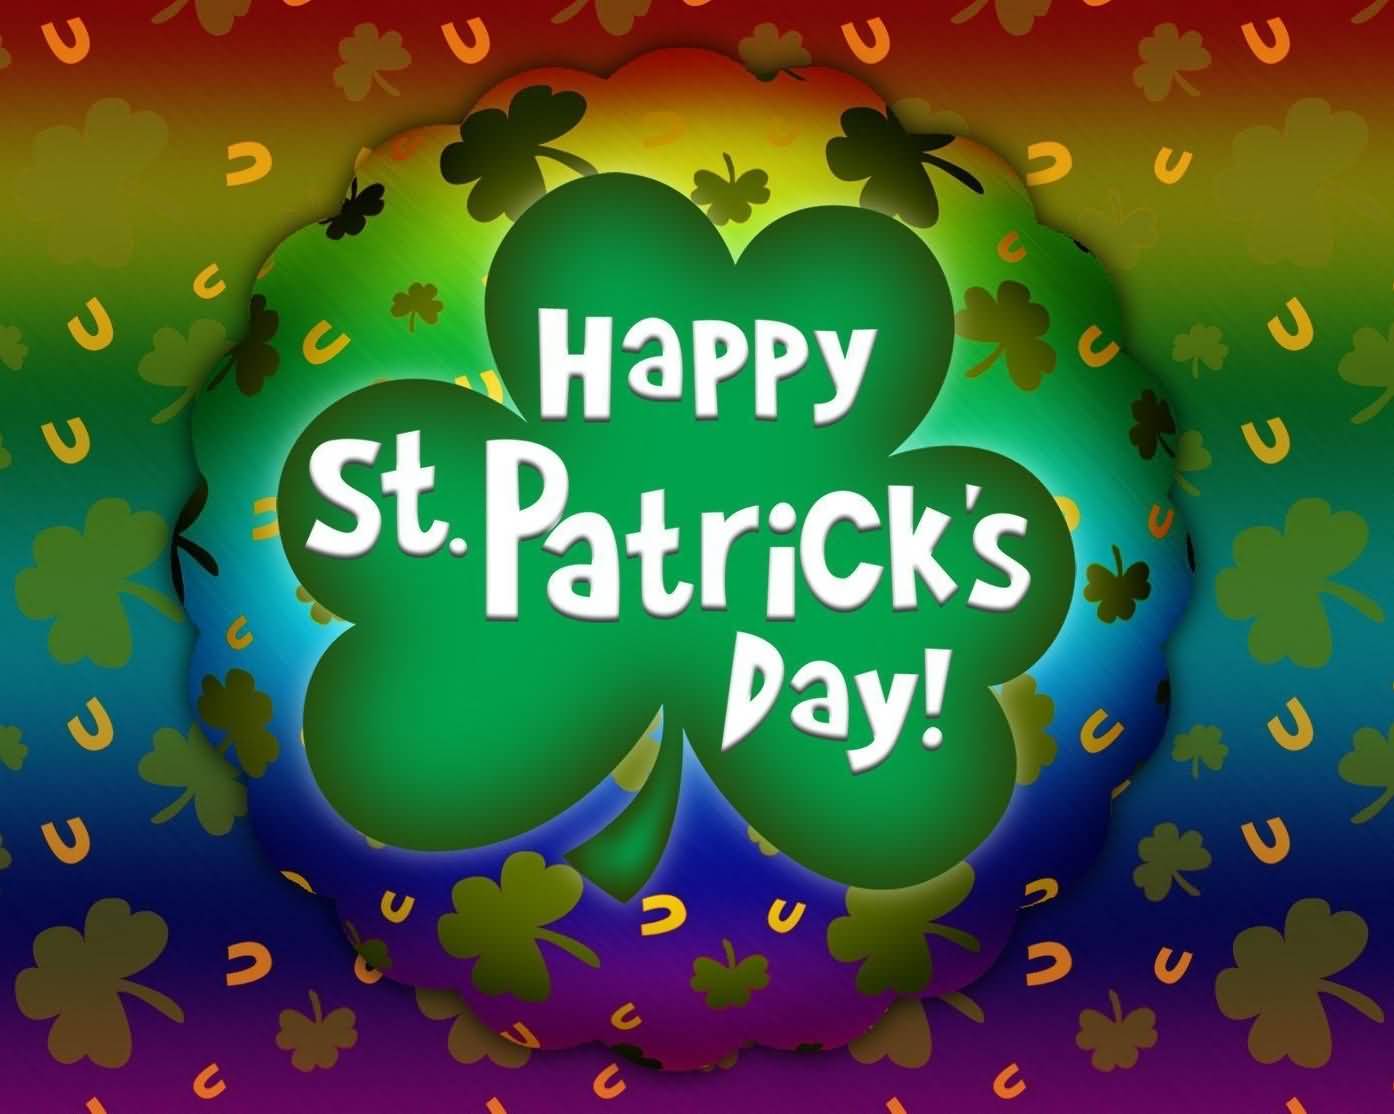 Happy Saint Patrick’s Day Clover Leaf Wishes Picture